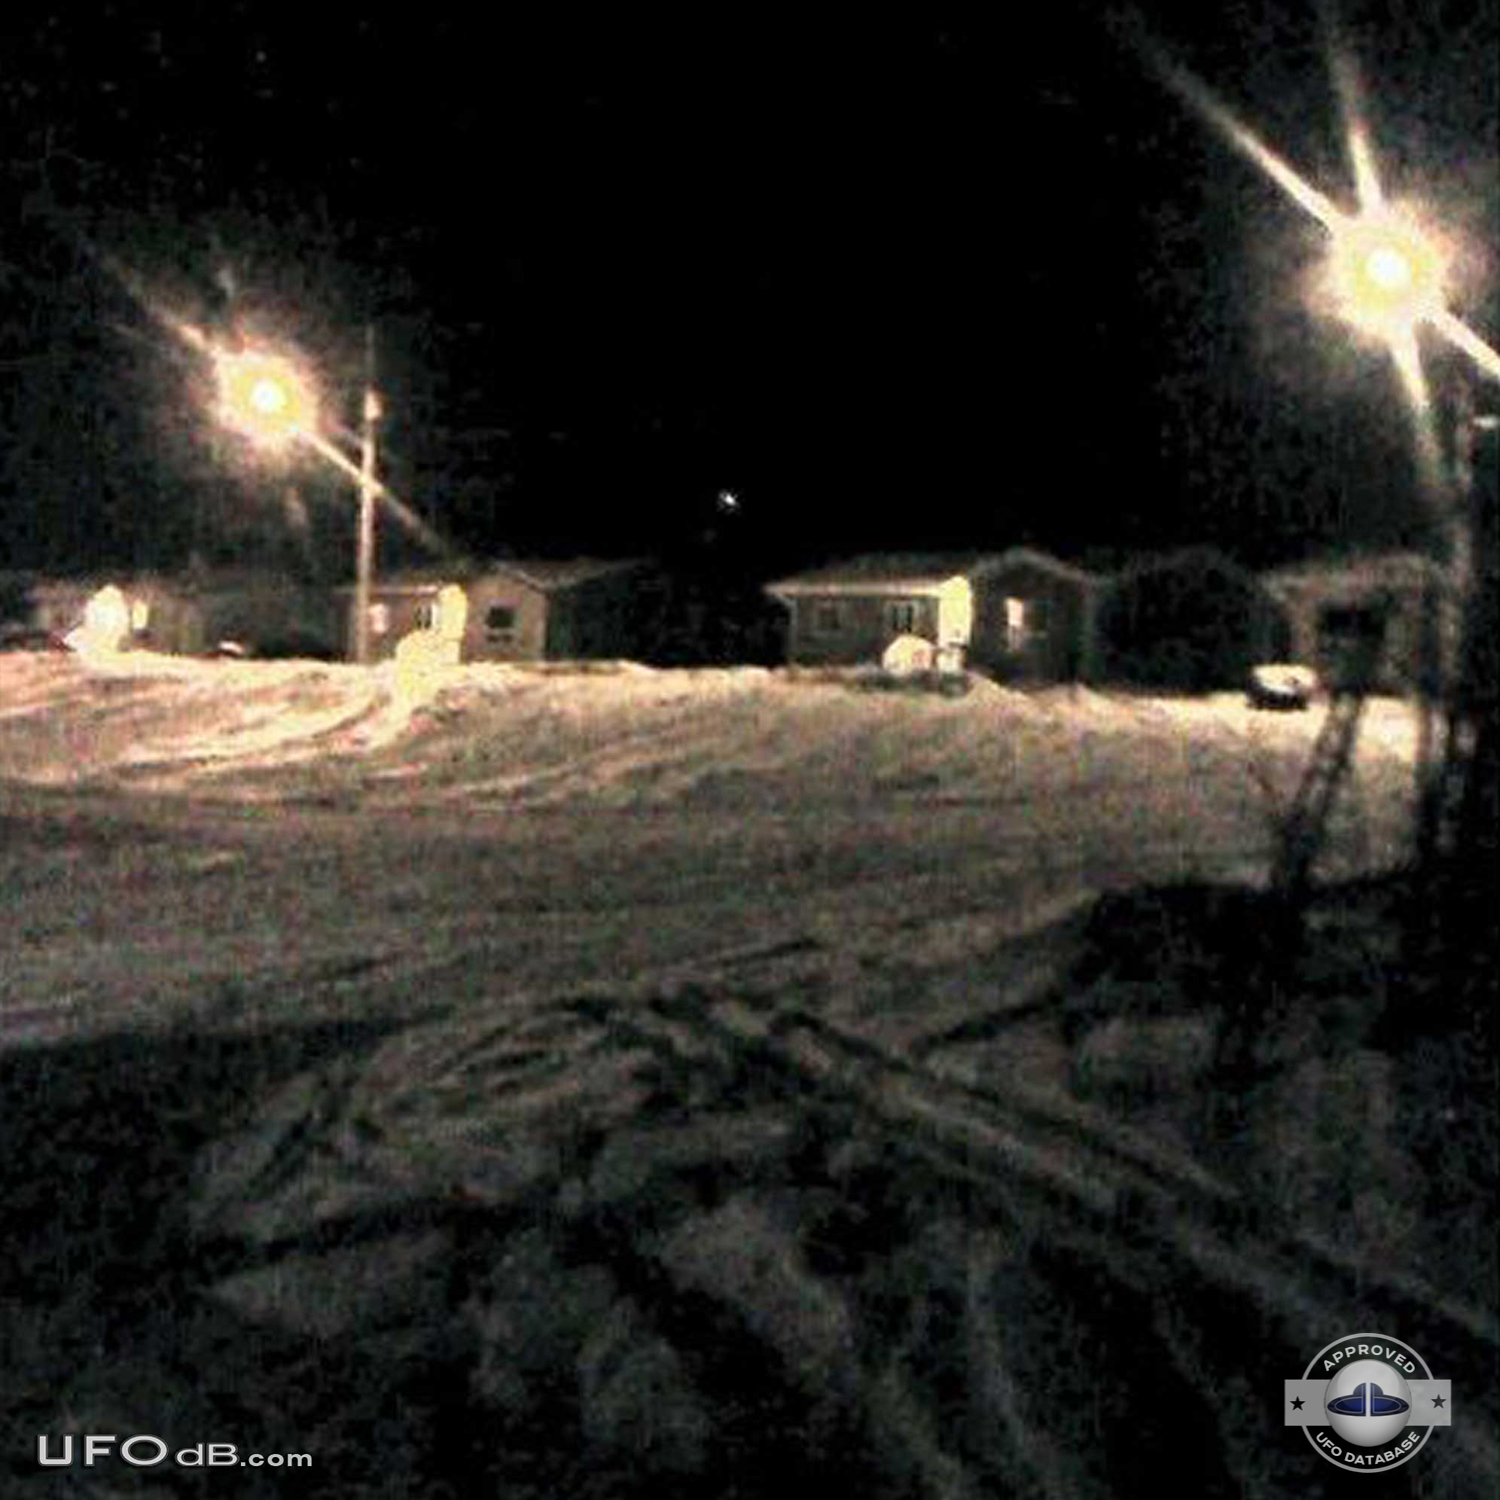 Much too low to be a star - UFO picture in Saskatchewan, Canada 2012 UFO Picture #403-1